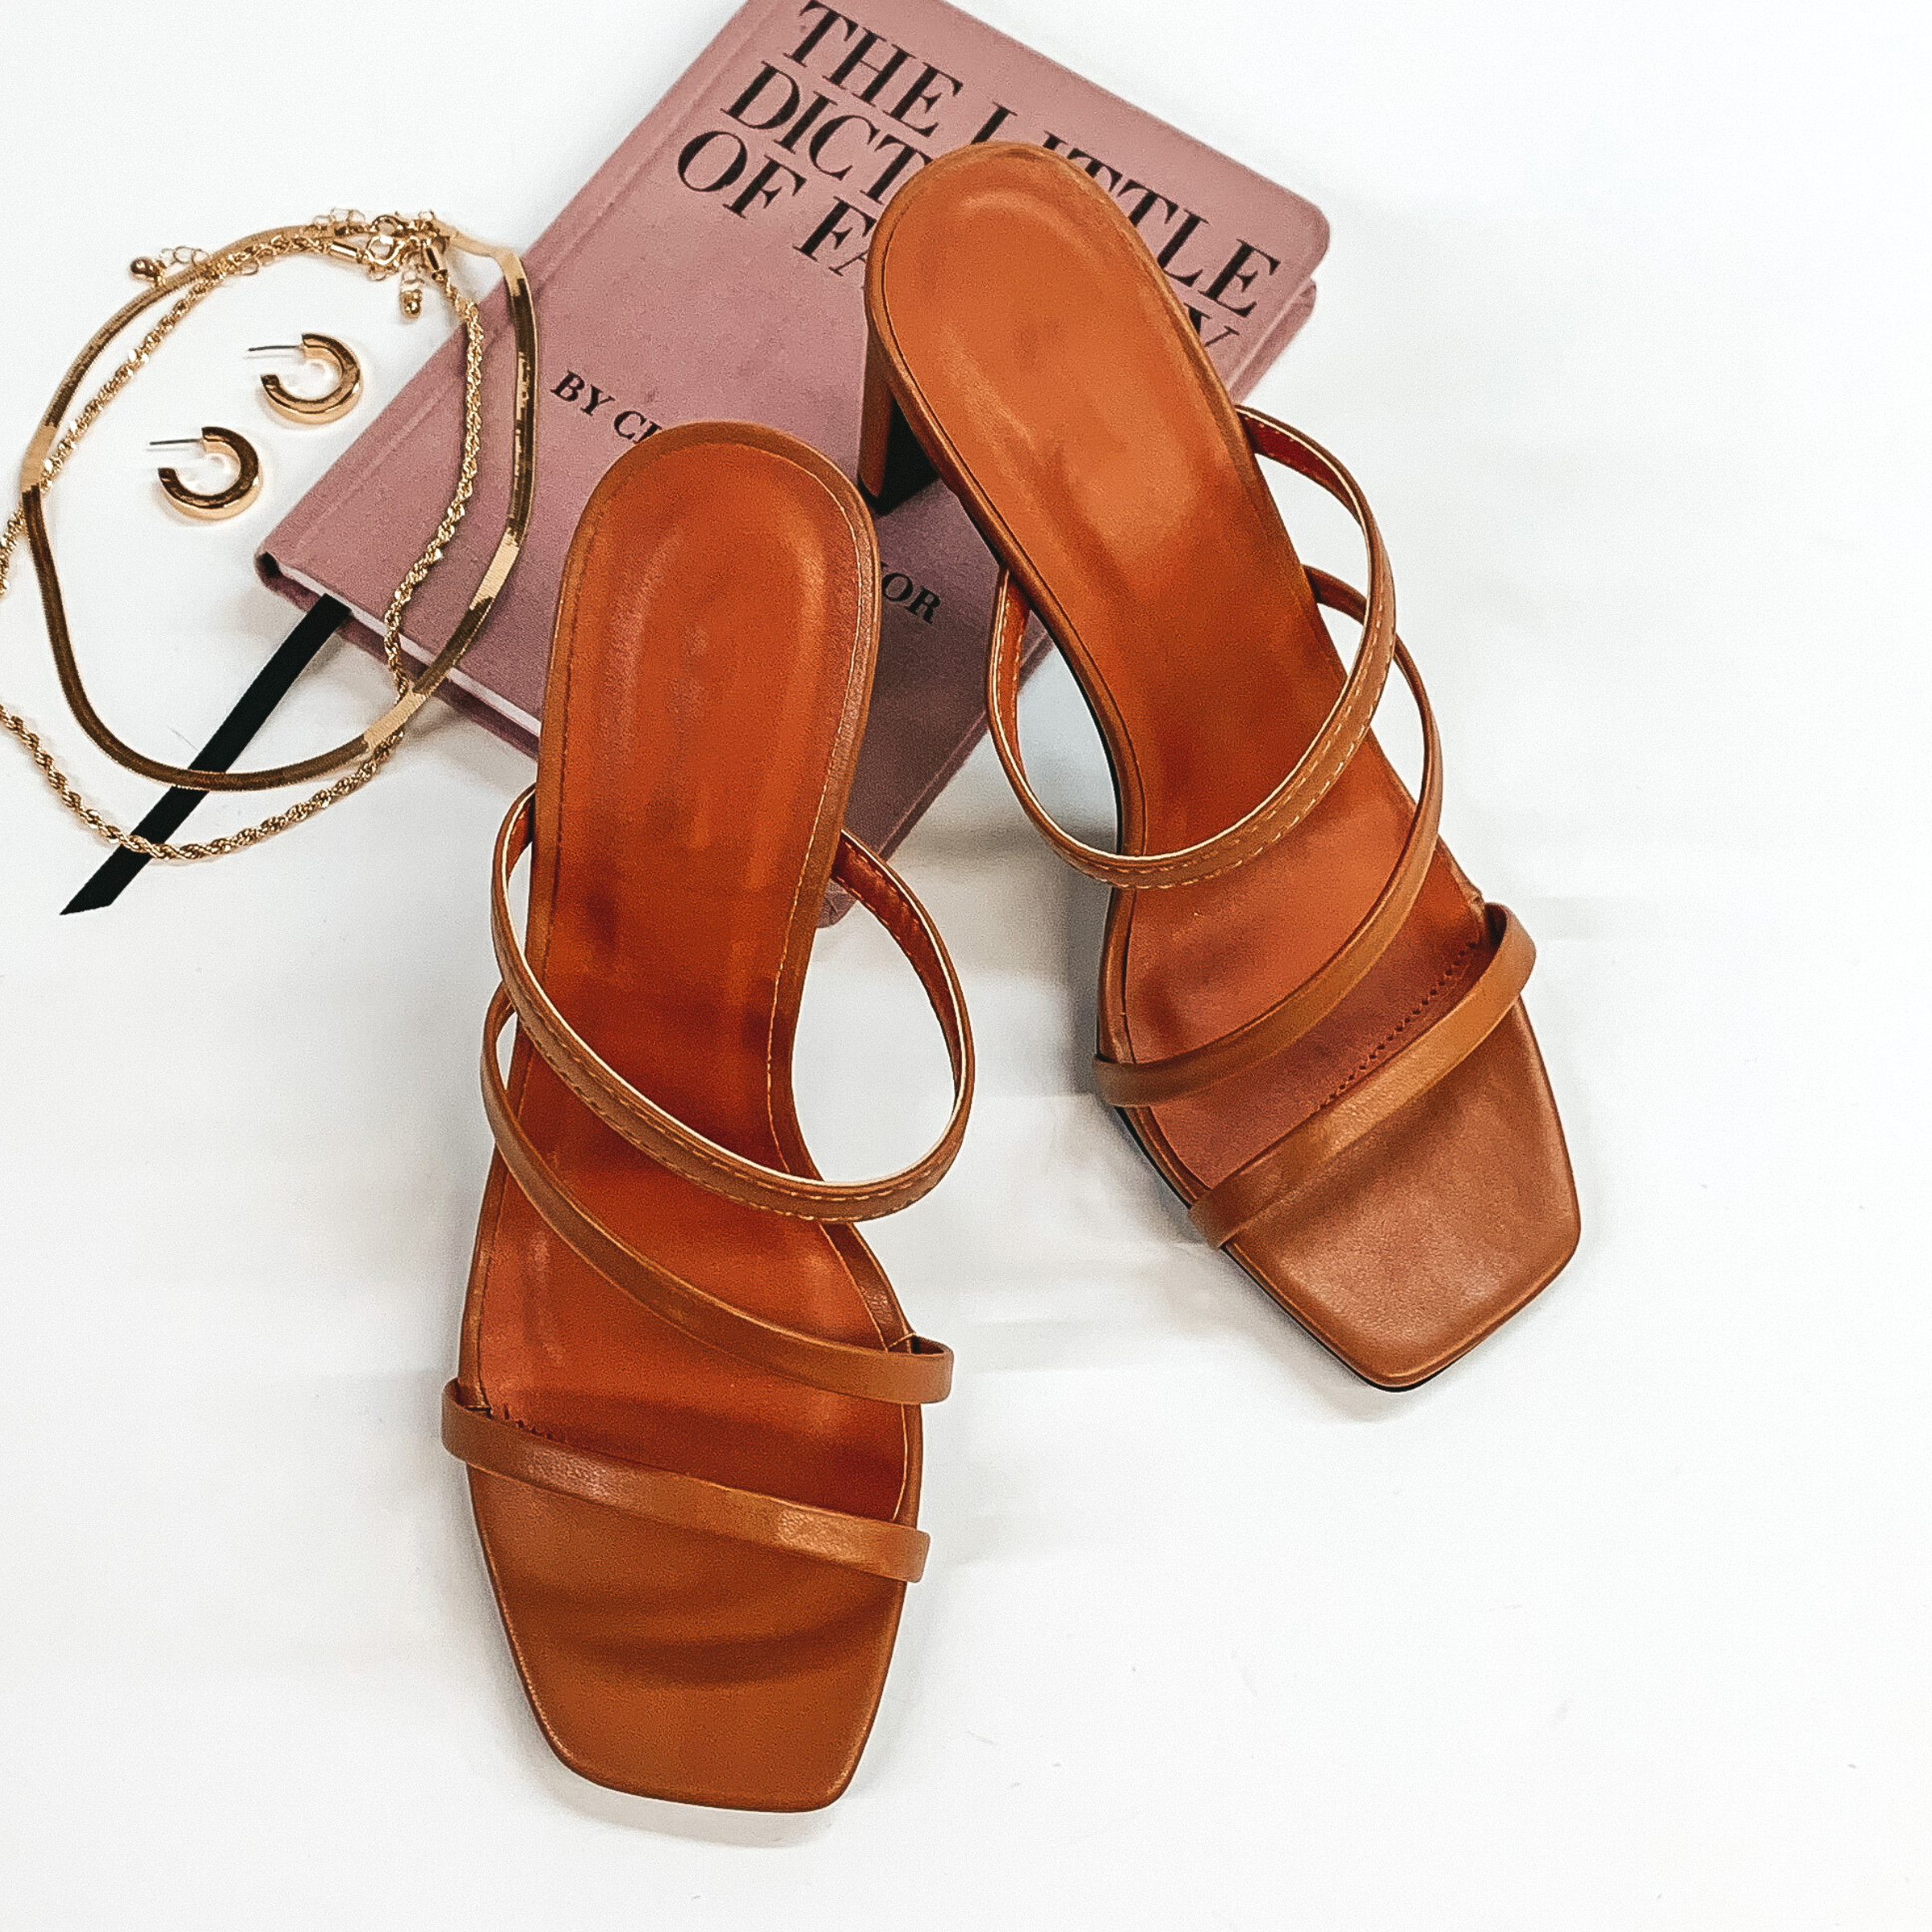 Sergio Rossi Brown Leather Strappy Sandals - Cash In Luxury